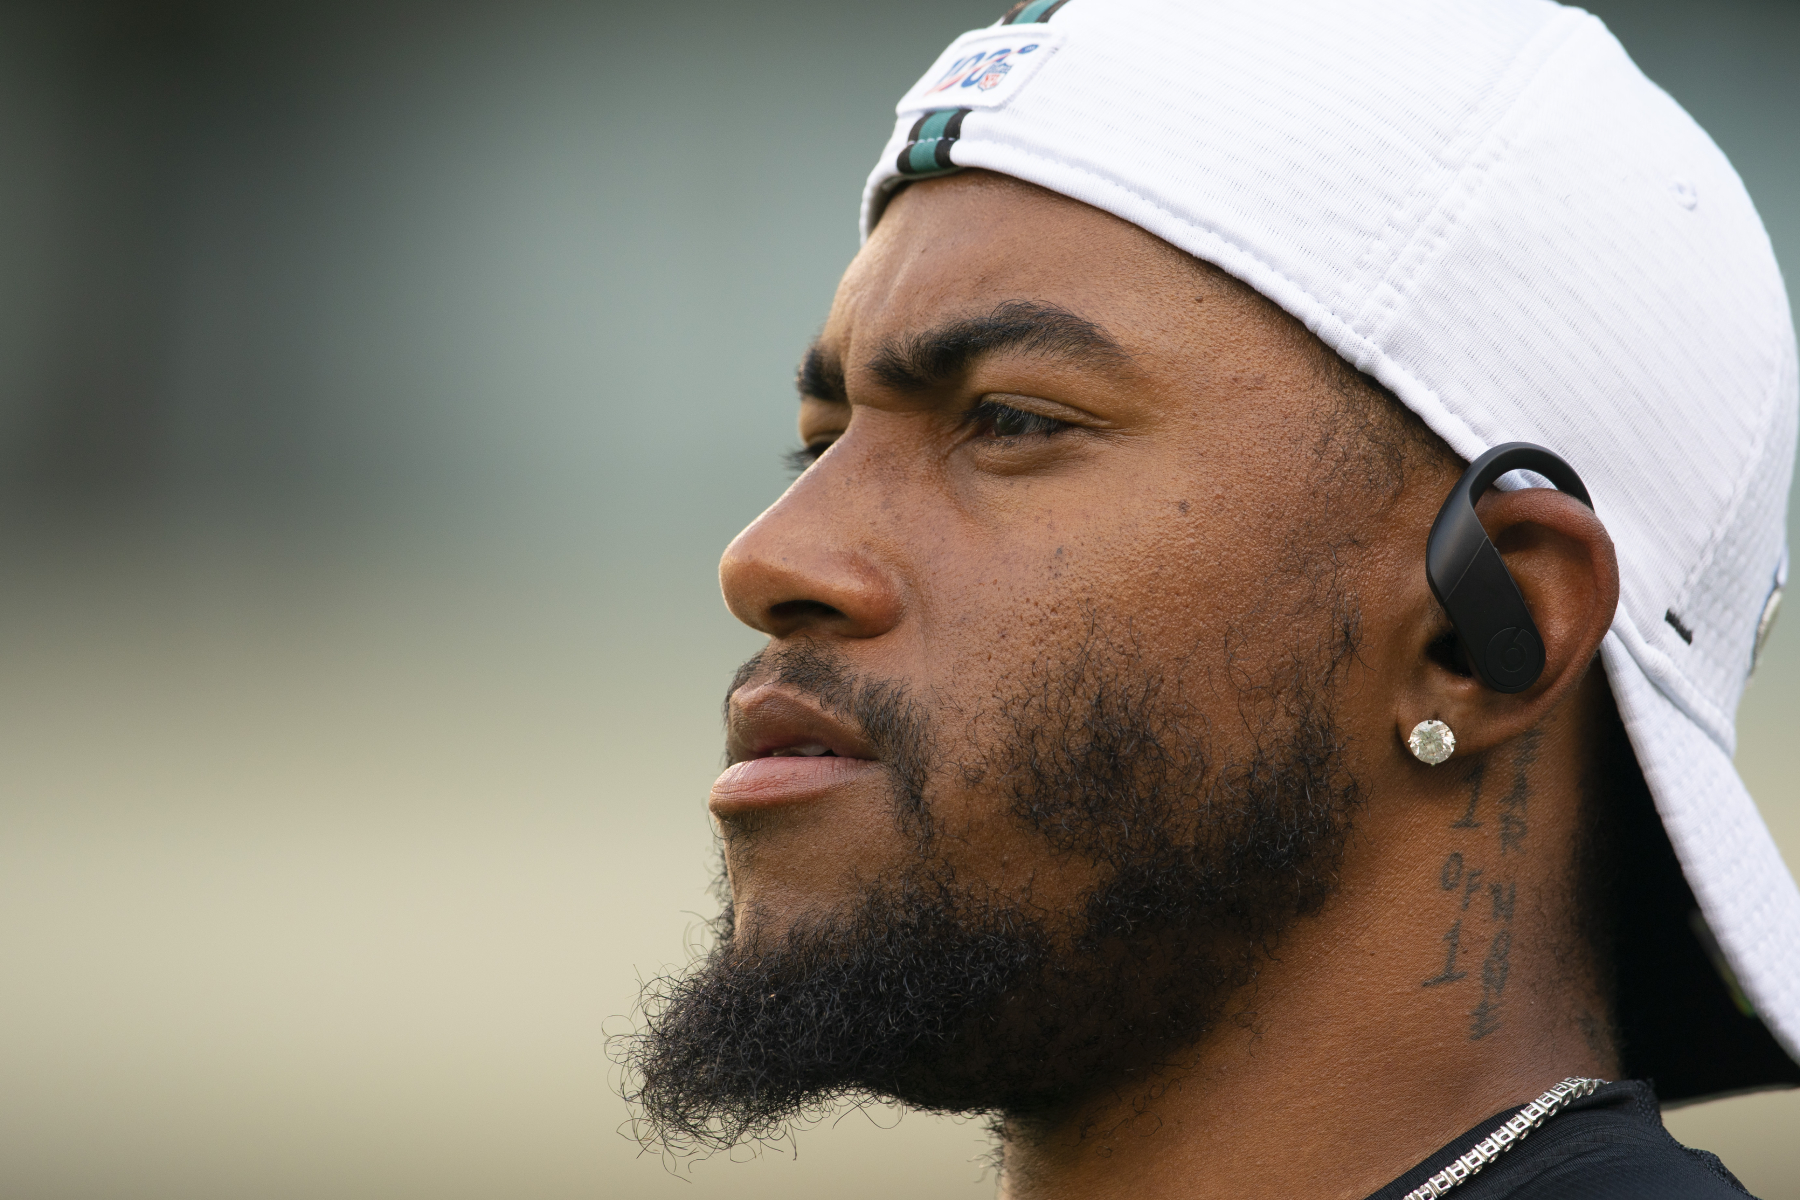 DeSean Jackson is in hot water after some offensive anti-Semitic posts. Jackson has been productive in his career and has made a lot of money.